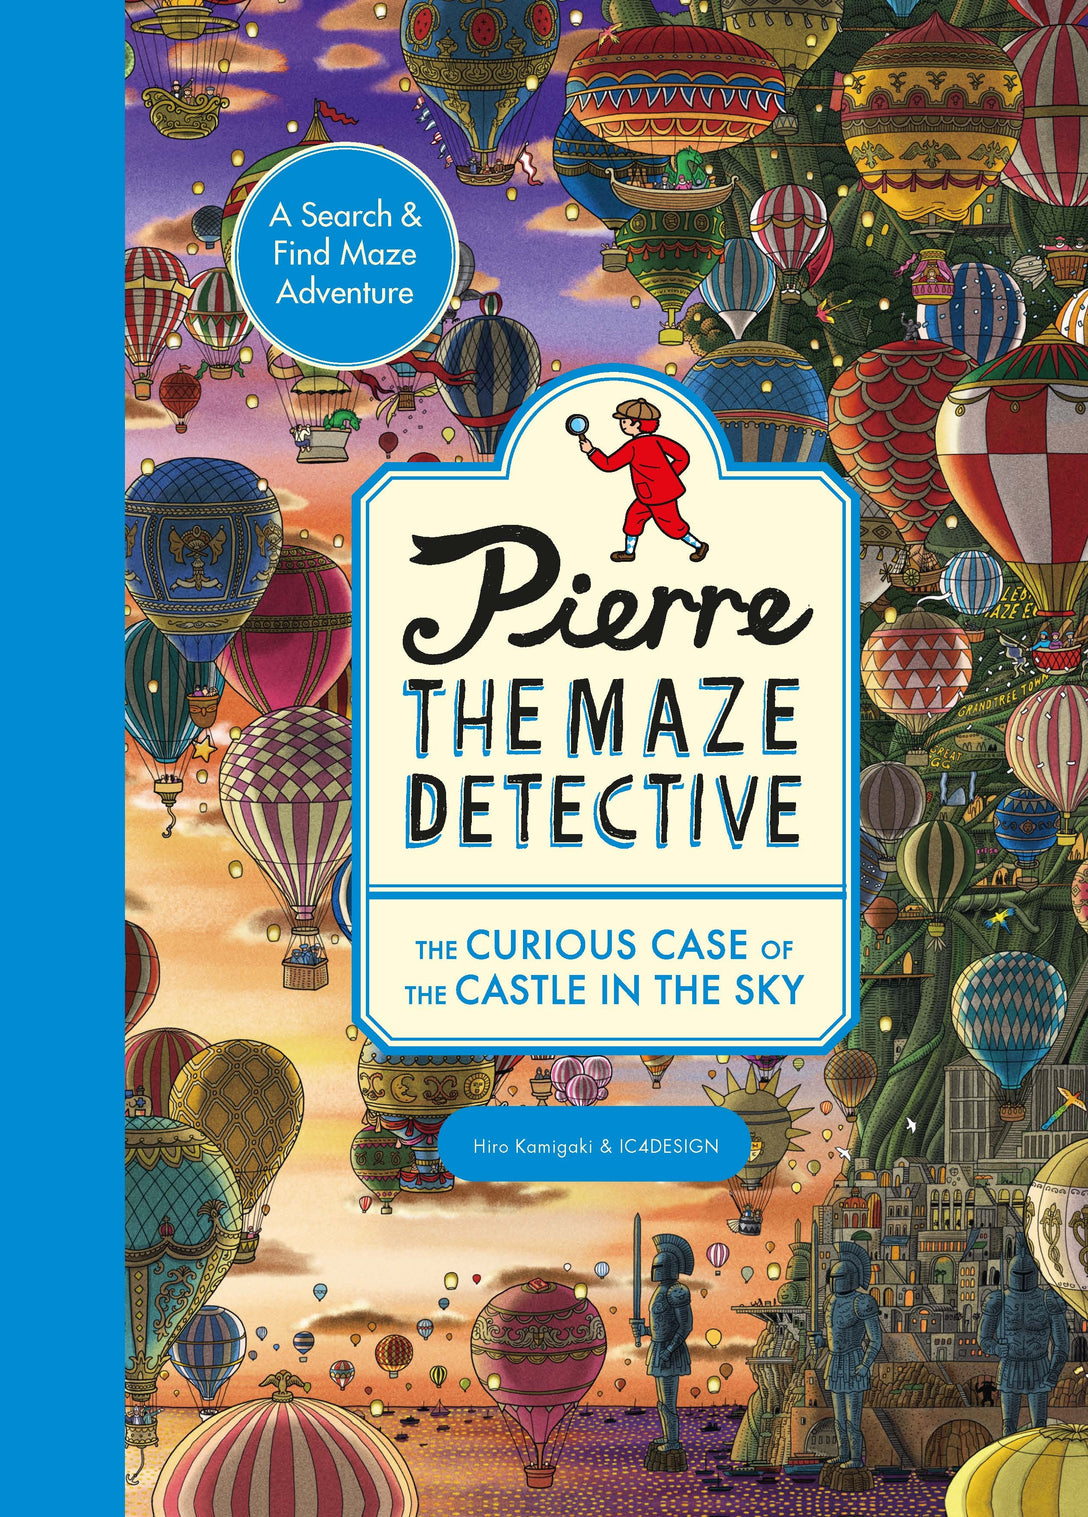 Pierre the Maze Detective: The Curious Case of the Castle in the Sky by Hiro Kamigaki